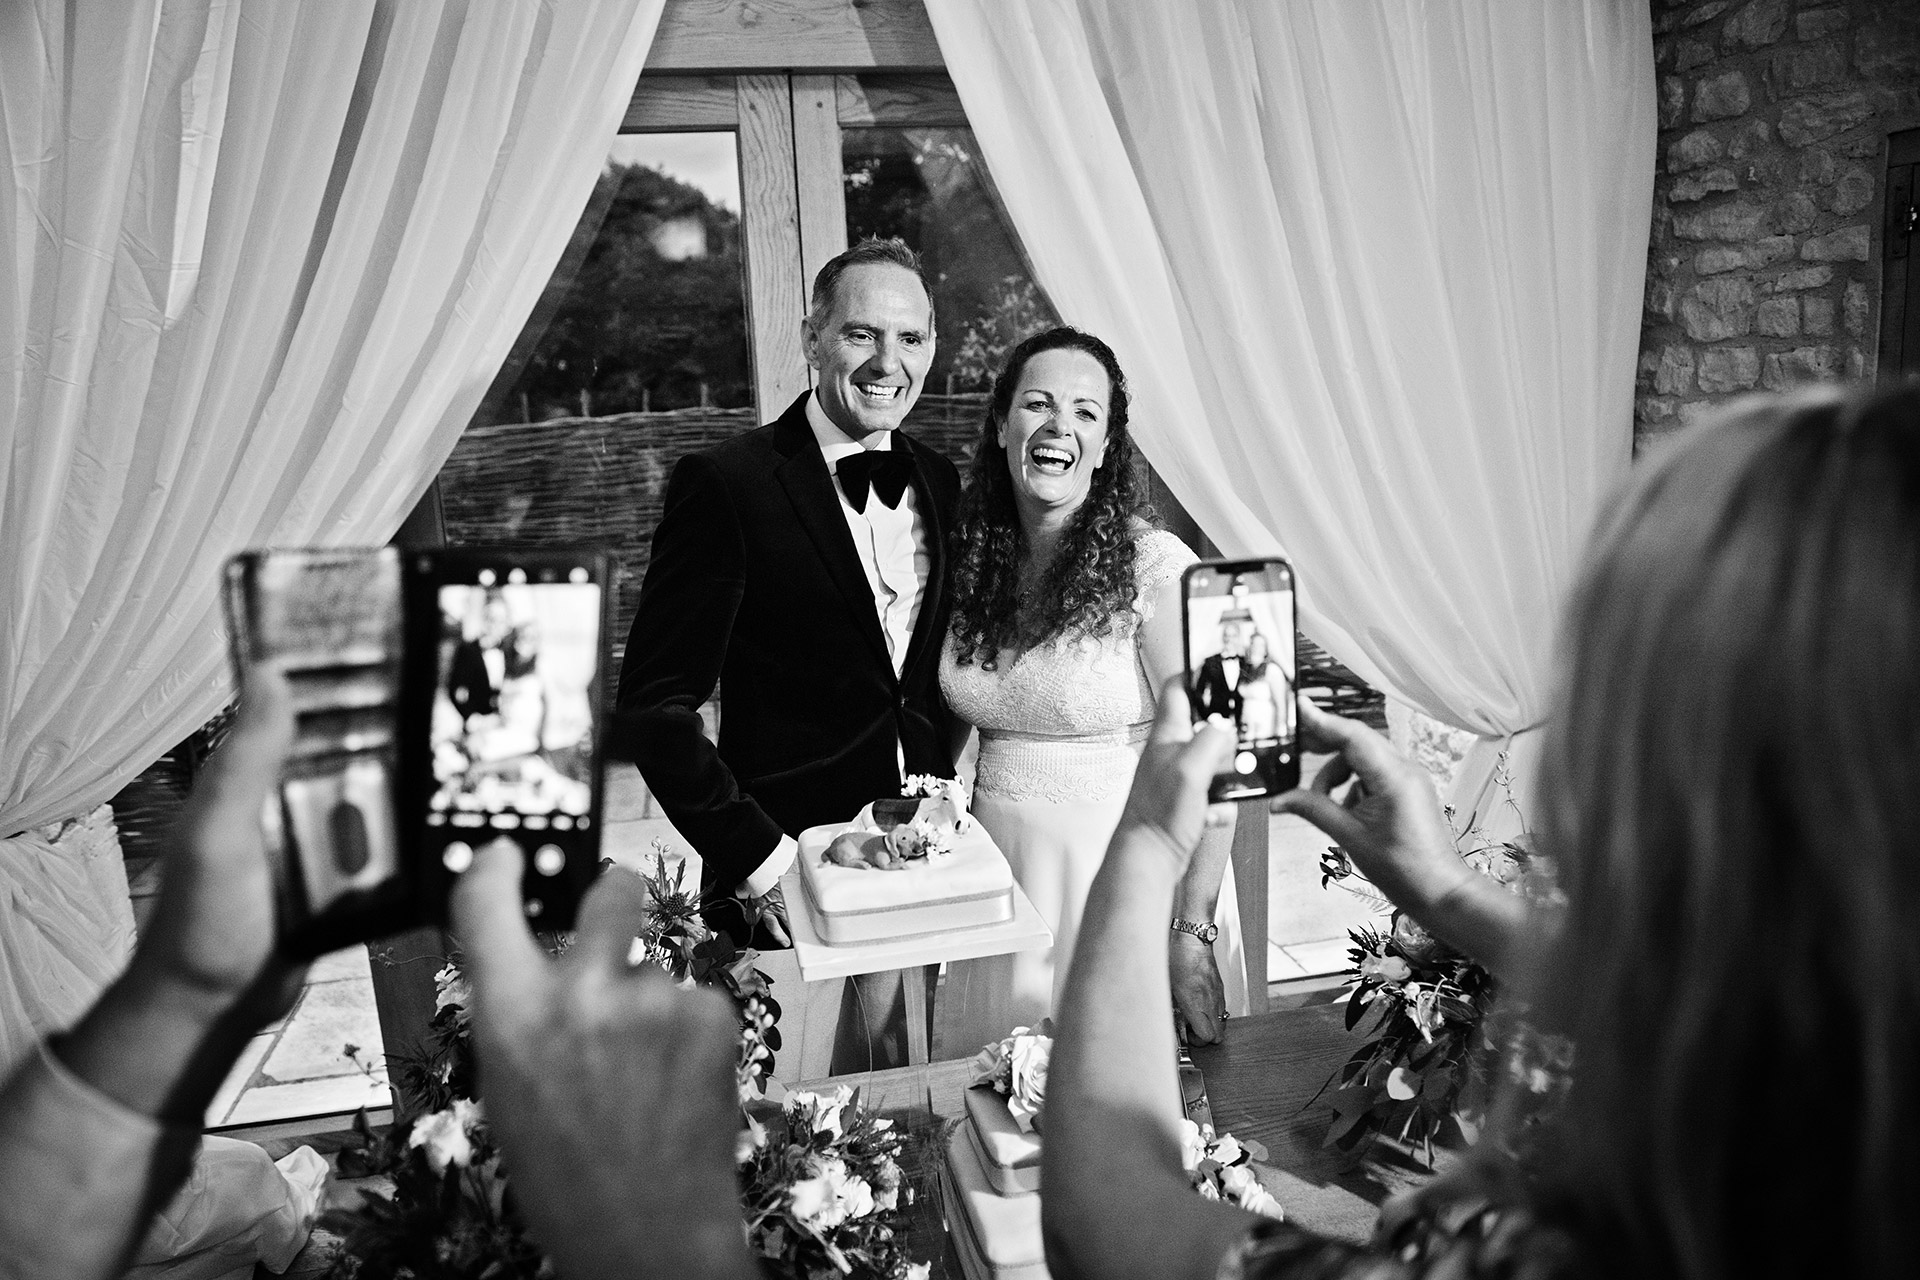 Bride and grooming smiling cutting their wedding cake infront of their friends with with taking photographs with their phones. Black and white image.